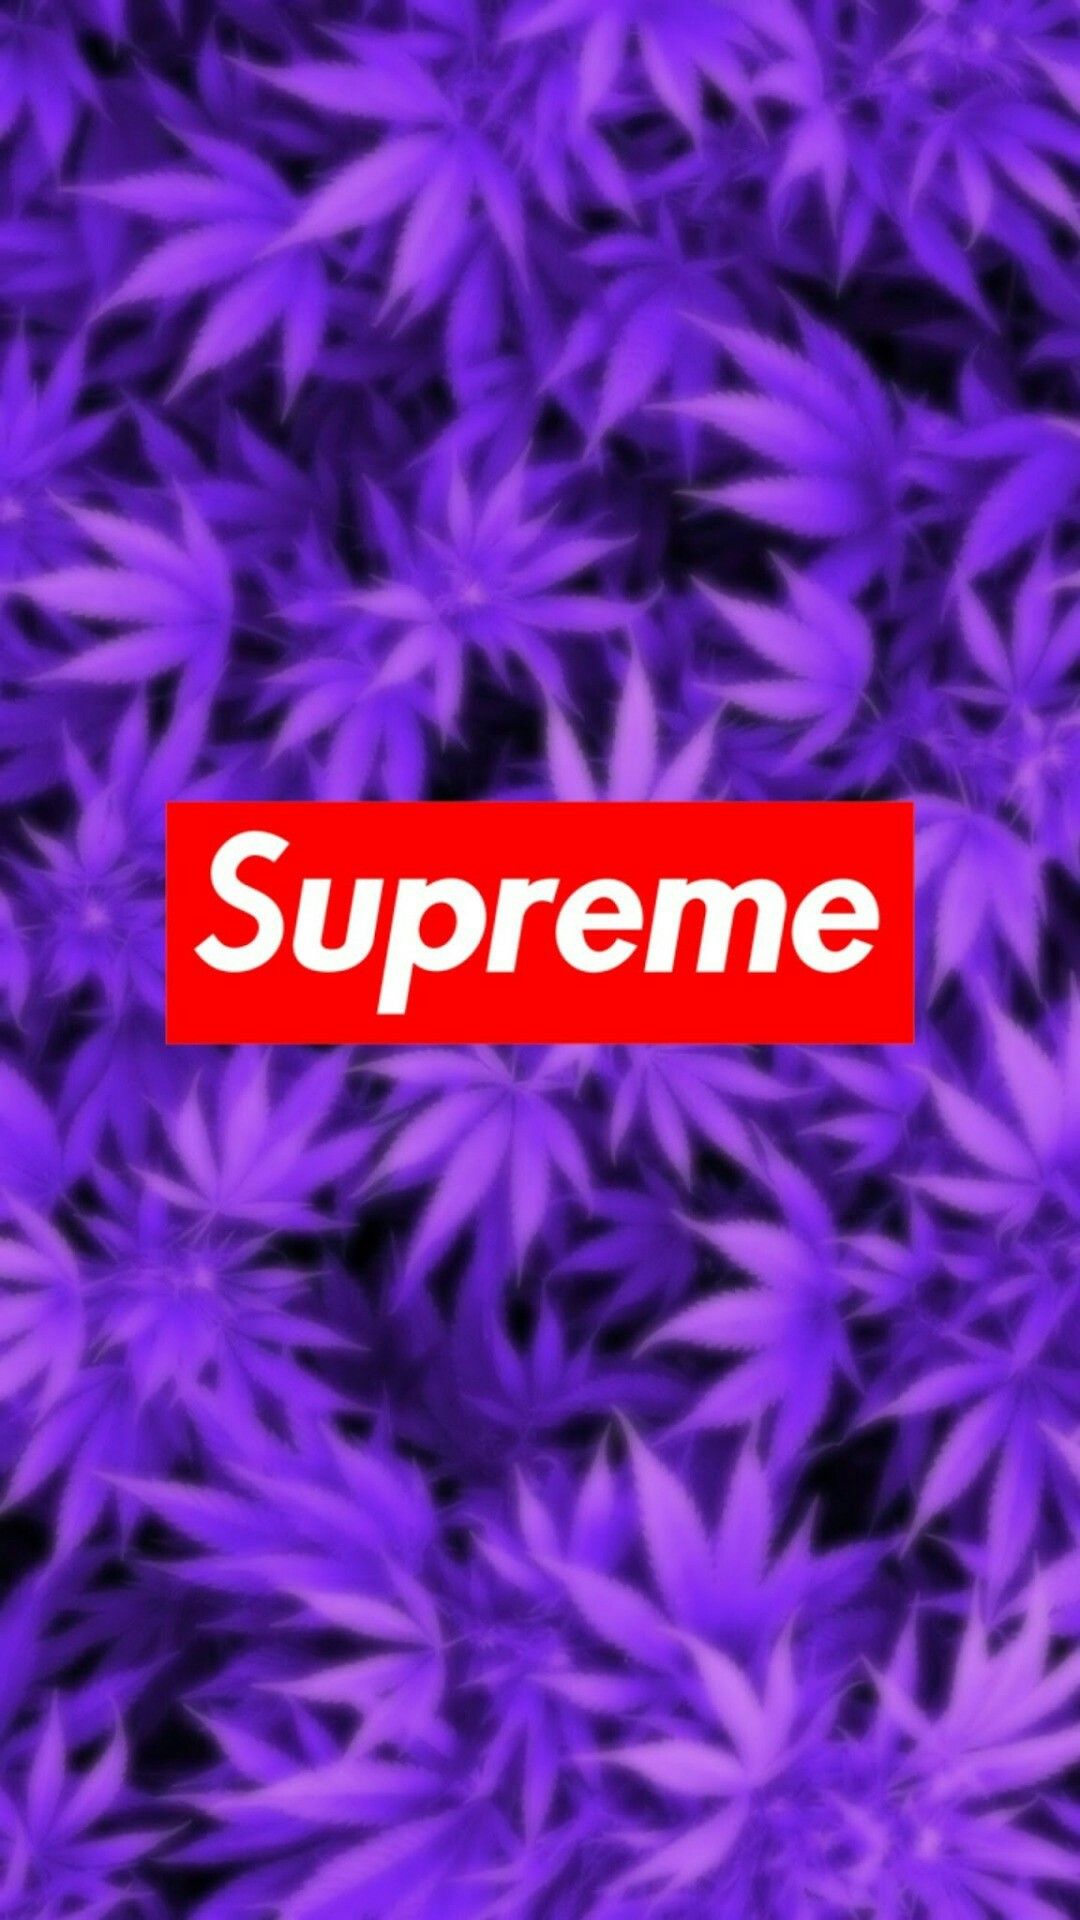 Floral Supreme Wallpapers